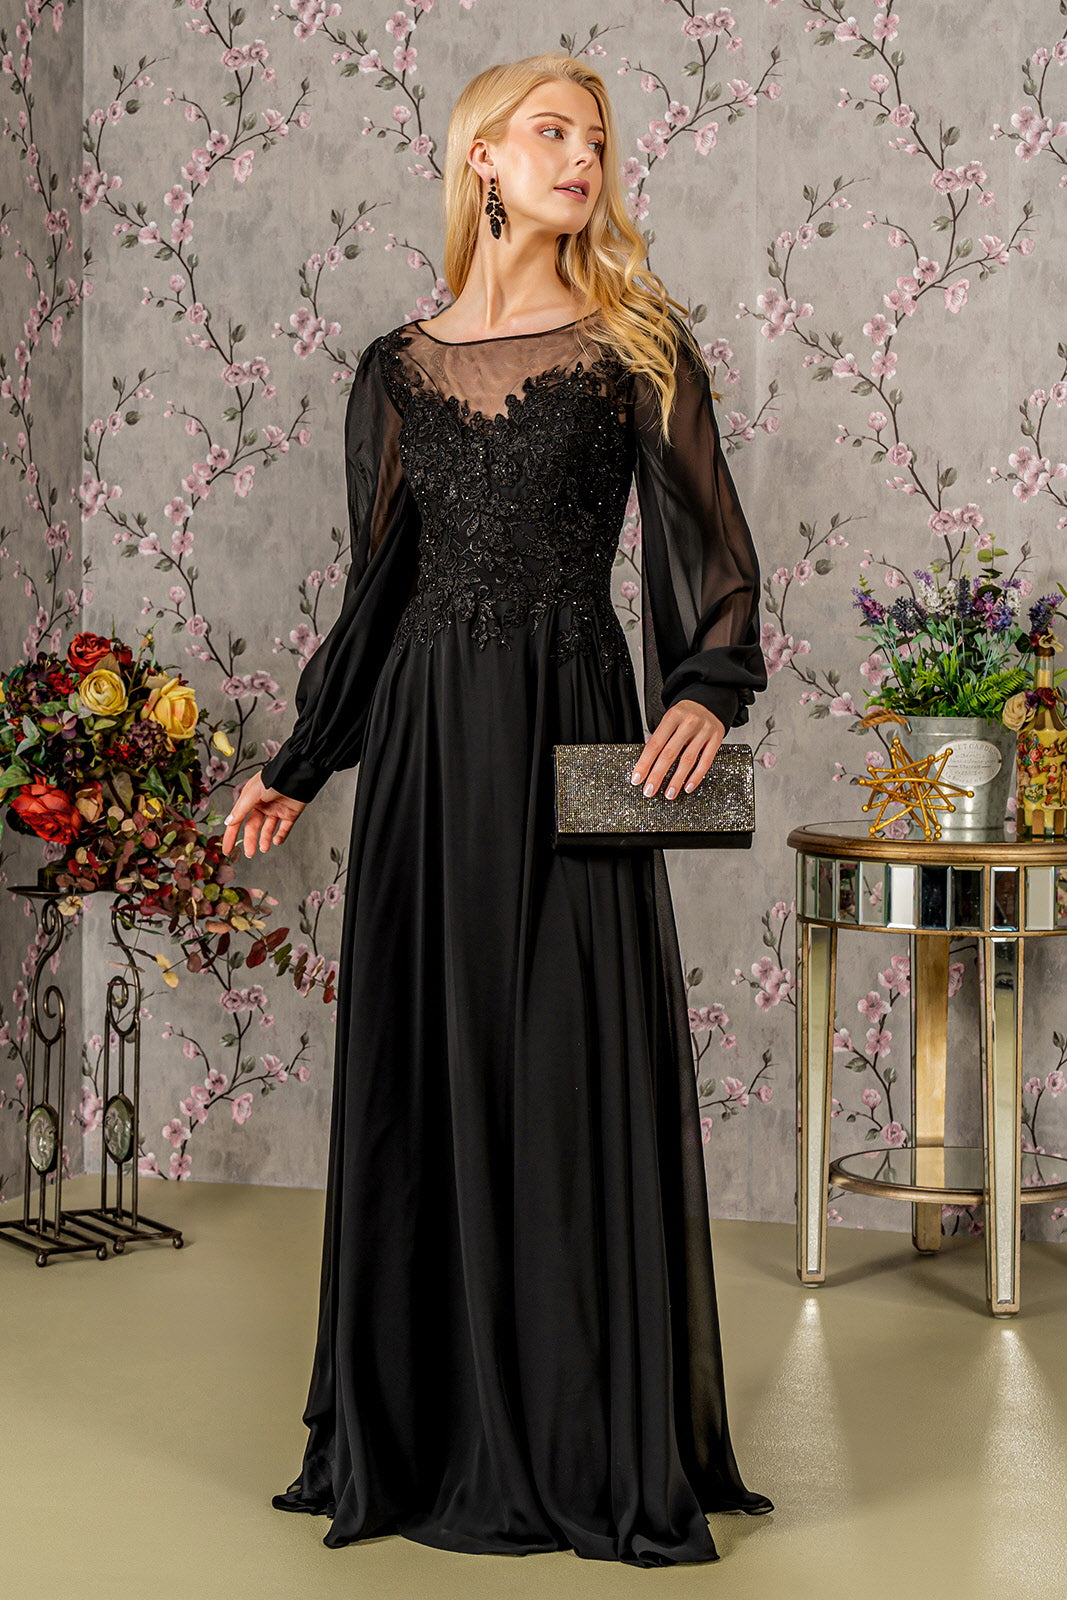 Mother of the Bride Dresses Floral A line Long Mother of the Bride Dress Black